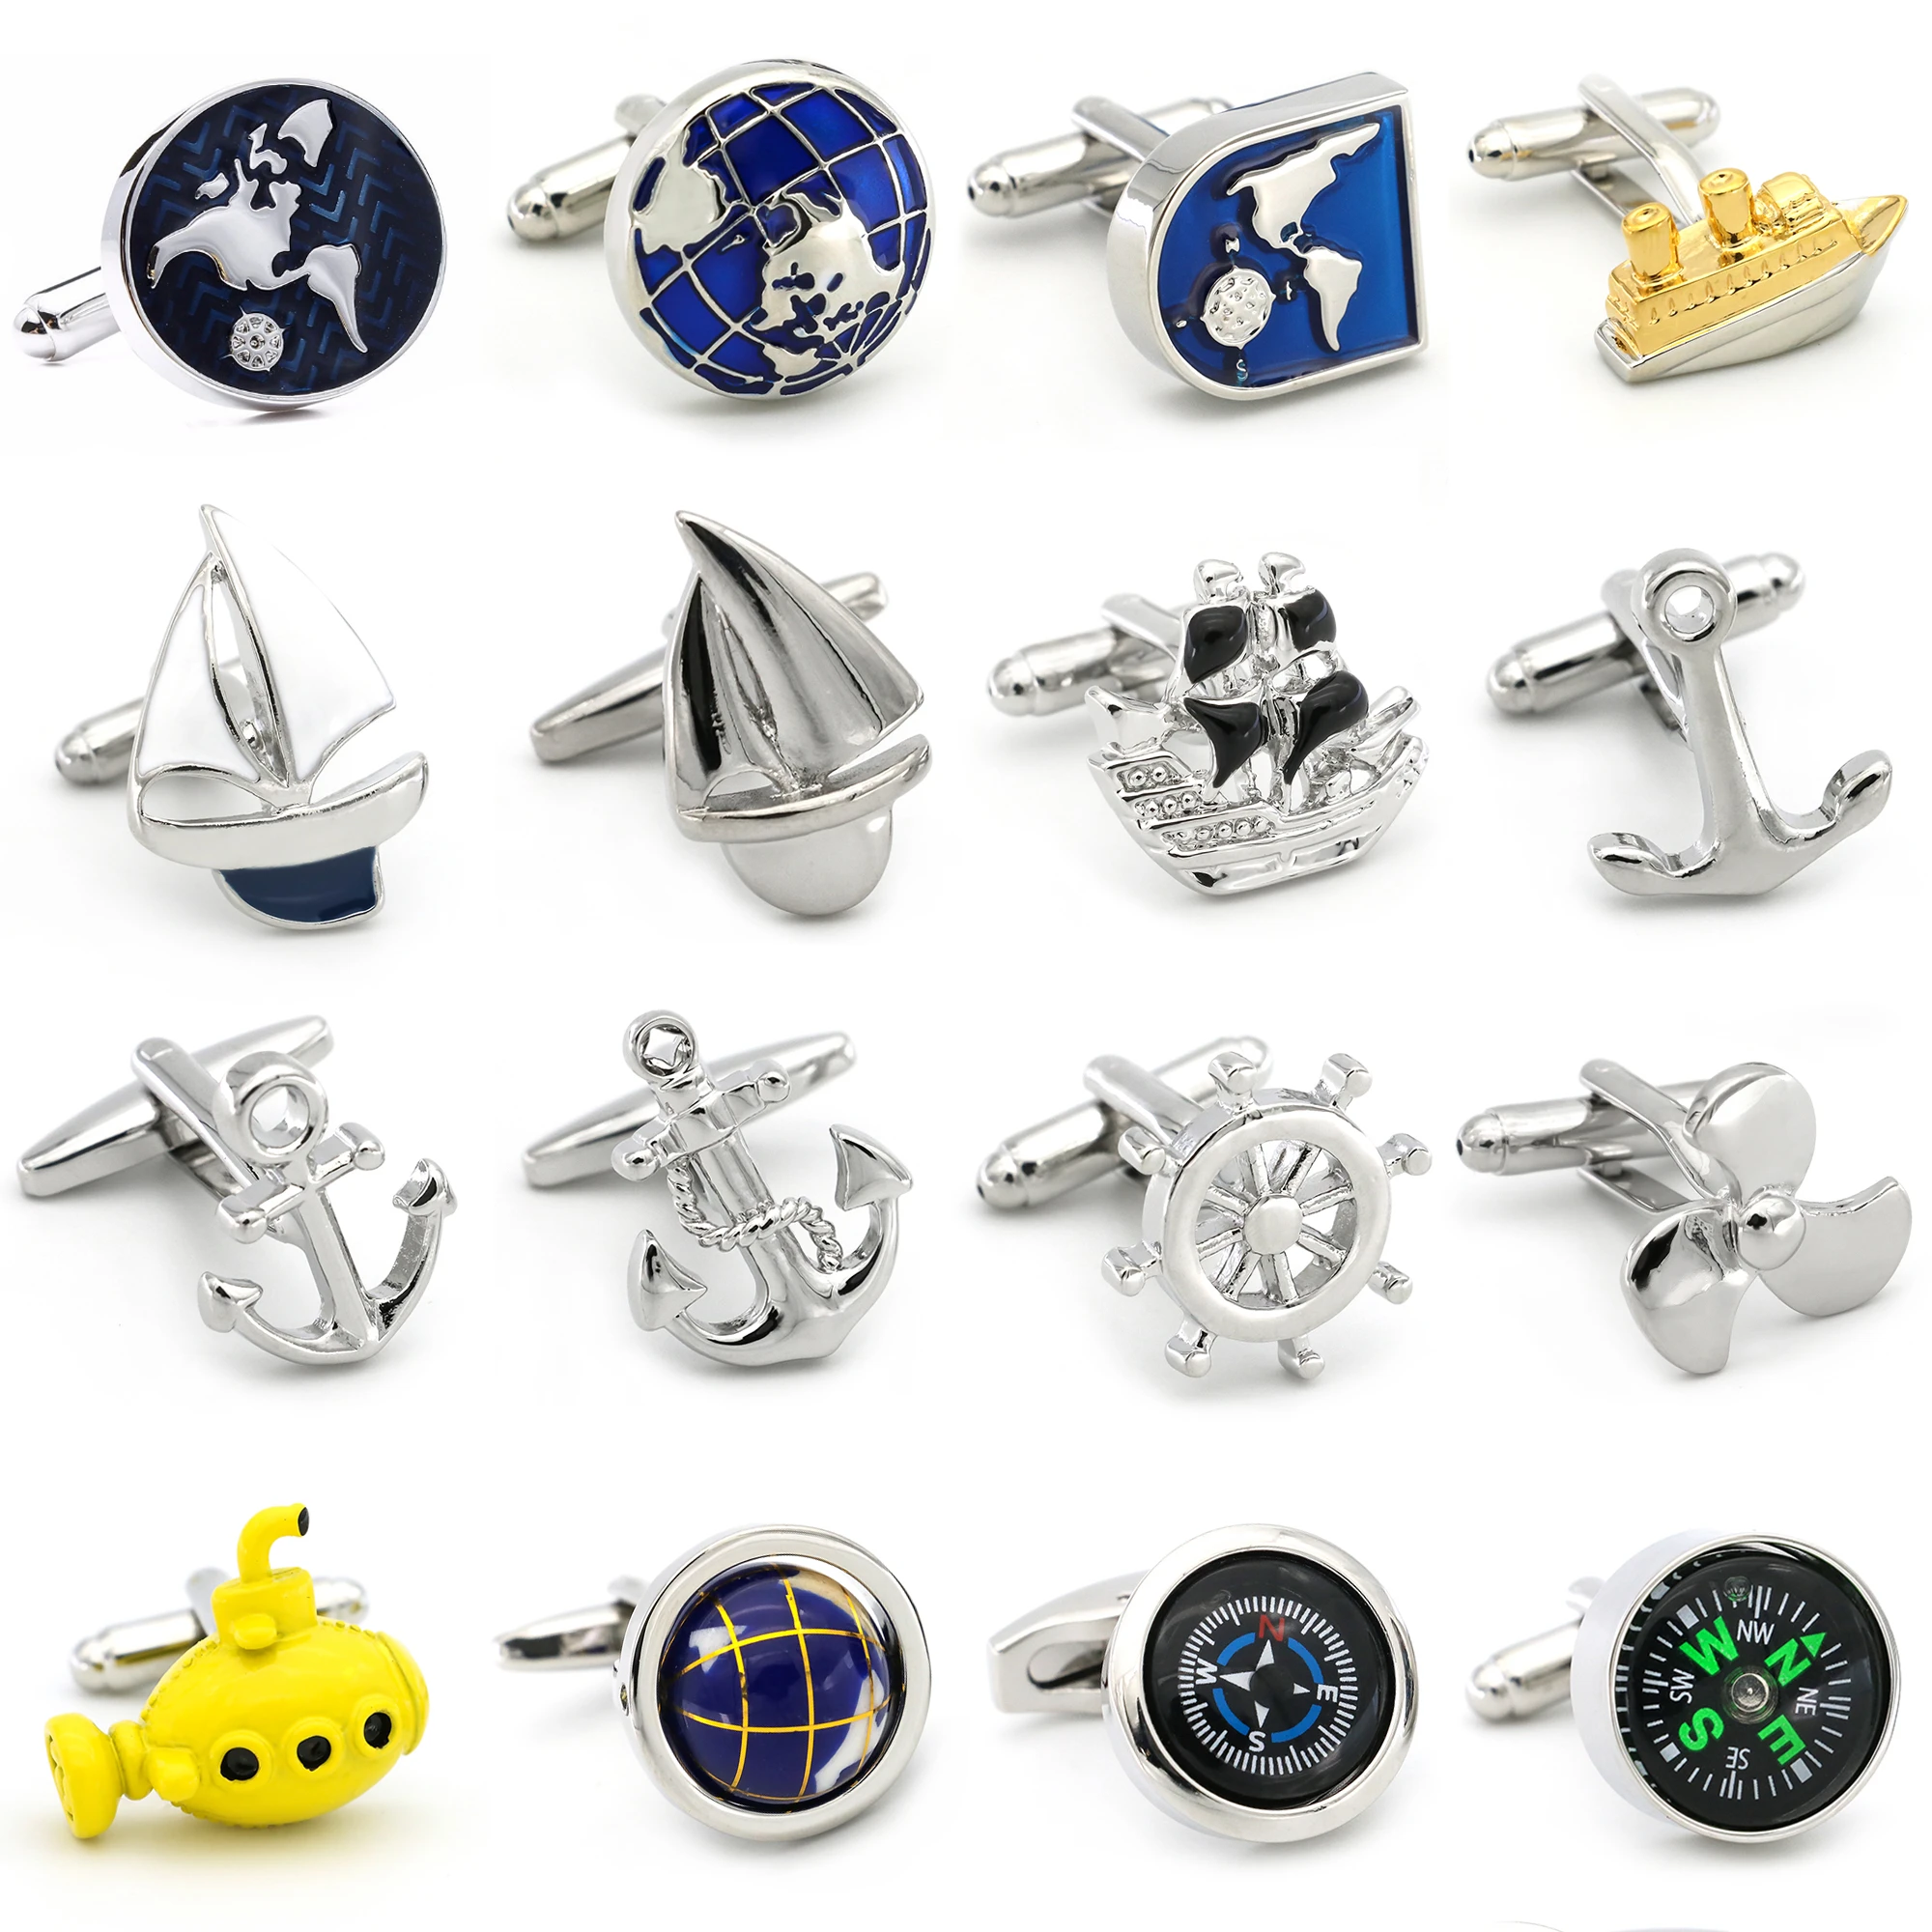 Free Shipping Cufflinks Retail Novelty Sail Design Blue White Color Sport Series Cufflinks For Men Cuff Links Wholesale&retail